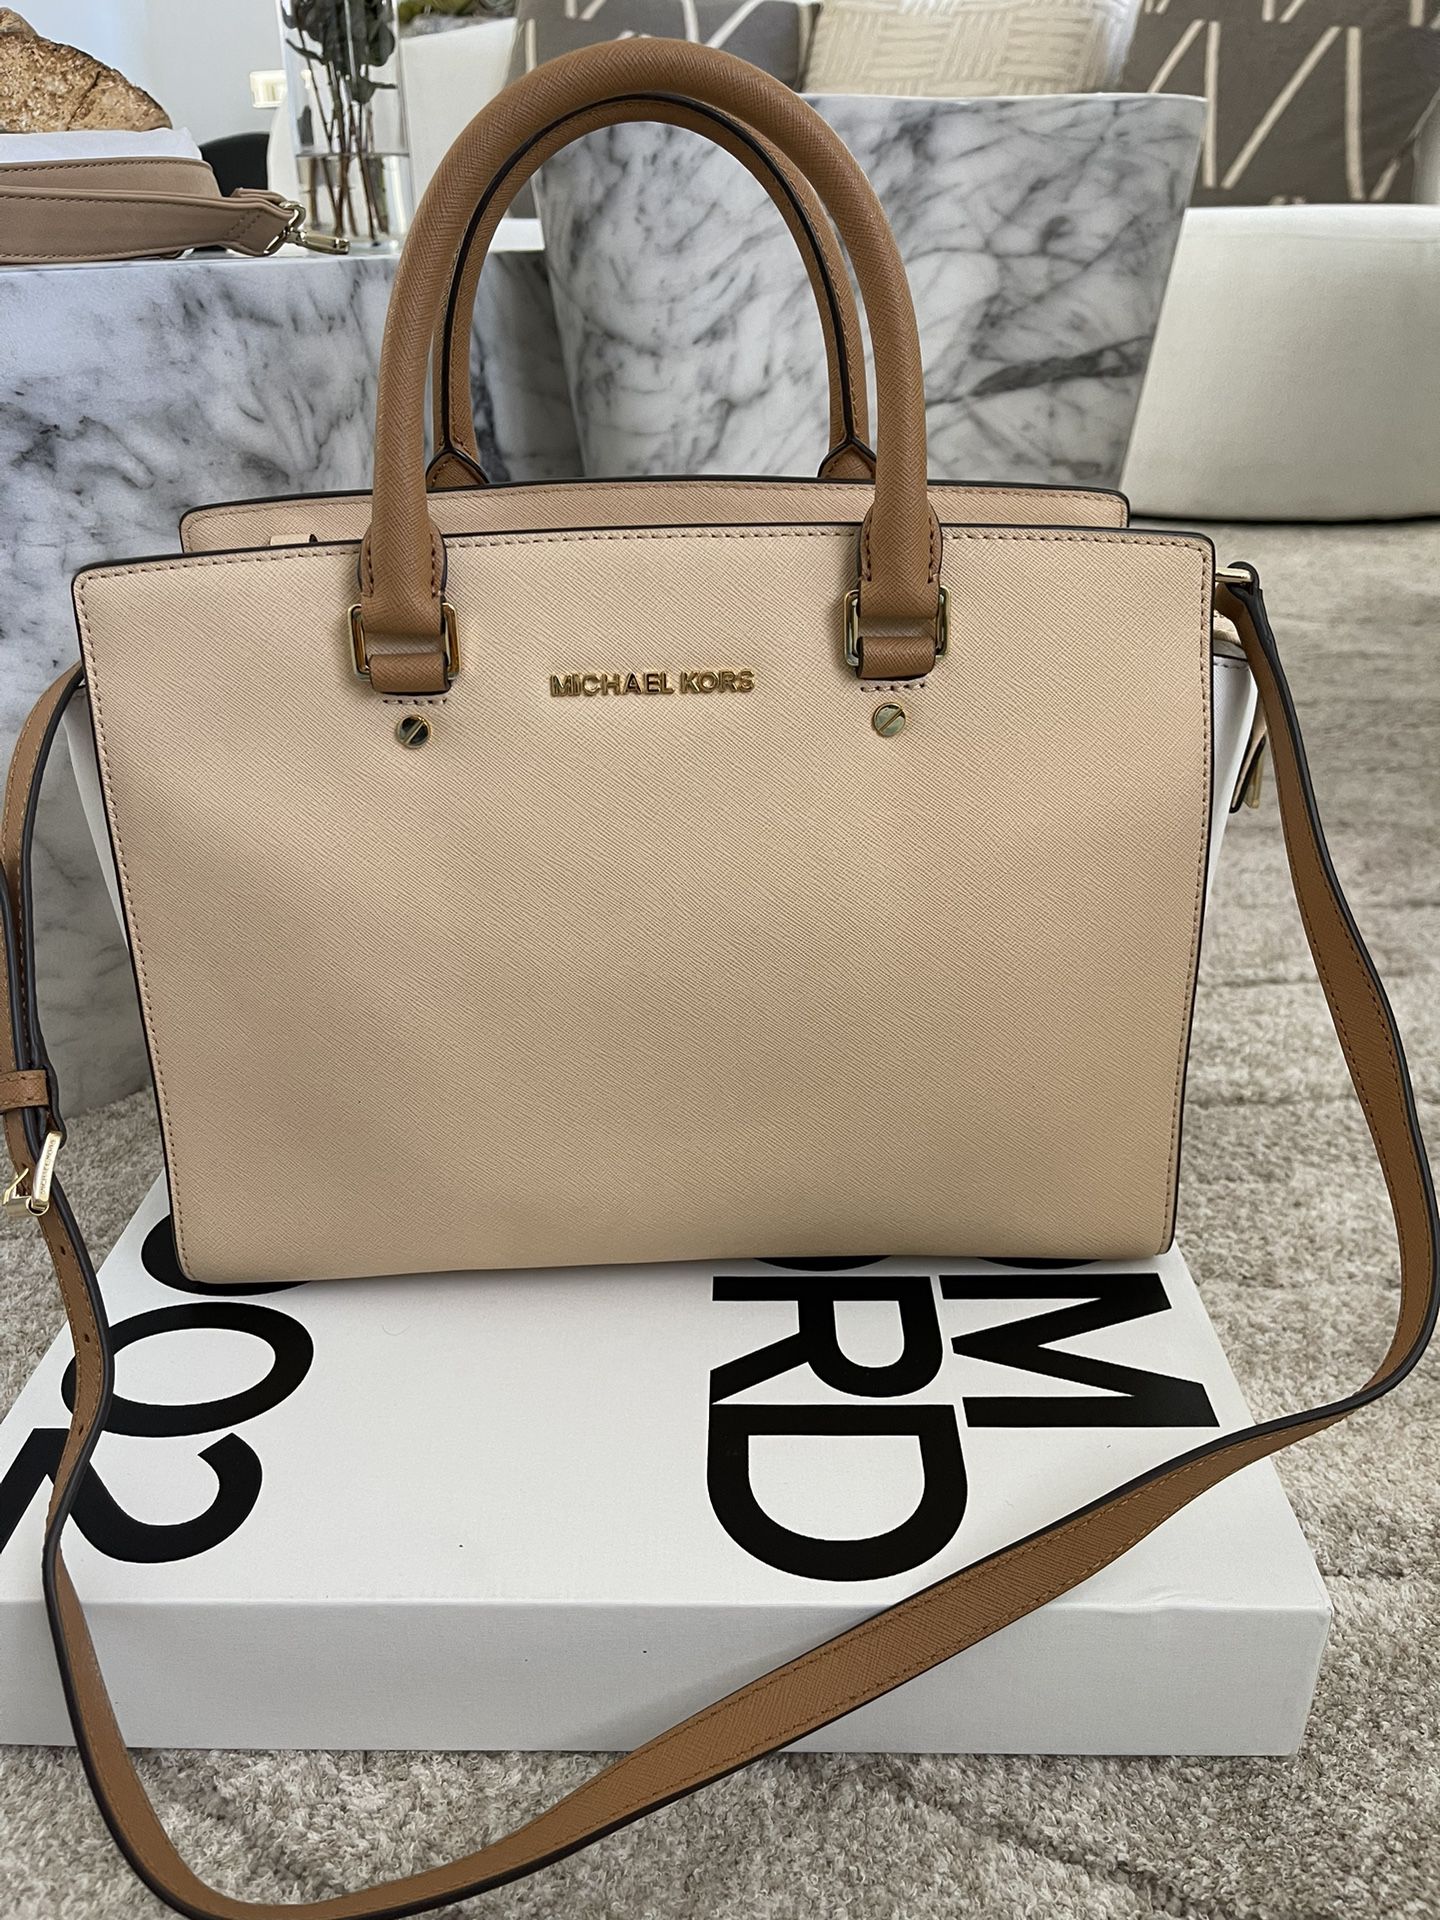 Michael Kors Hand Bag for Sale in Fresno, CA - OfferUp